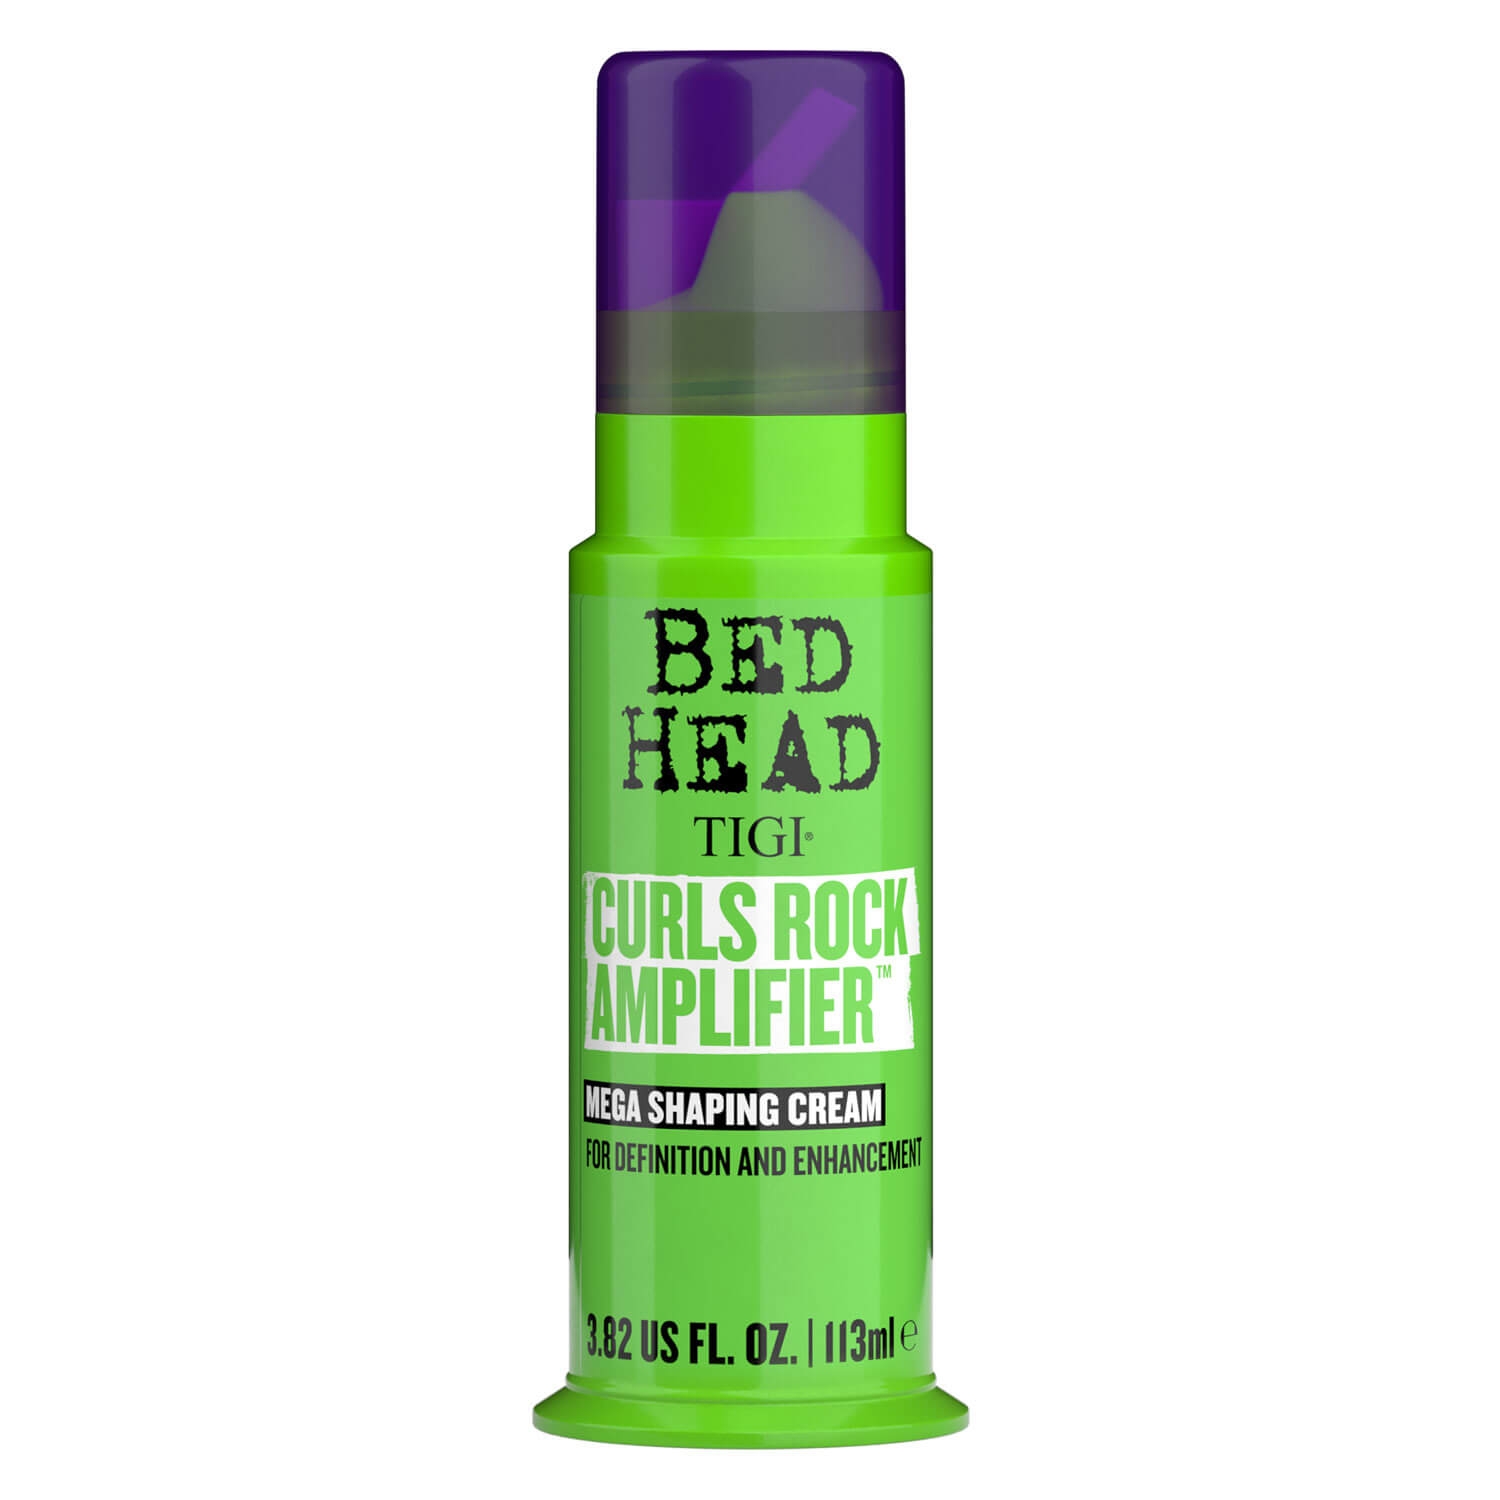 Product image from Bed Head - Curls Rock Amplifier Mega Shaping Cream